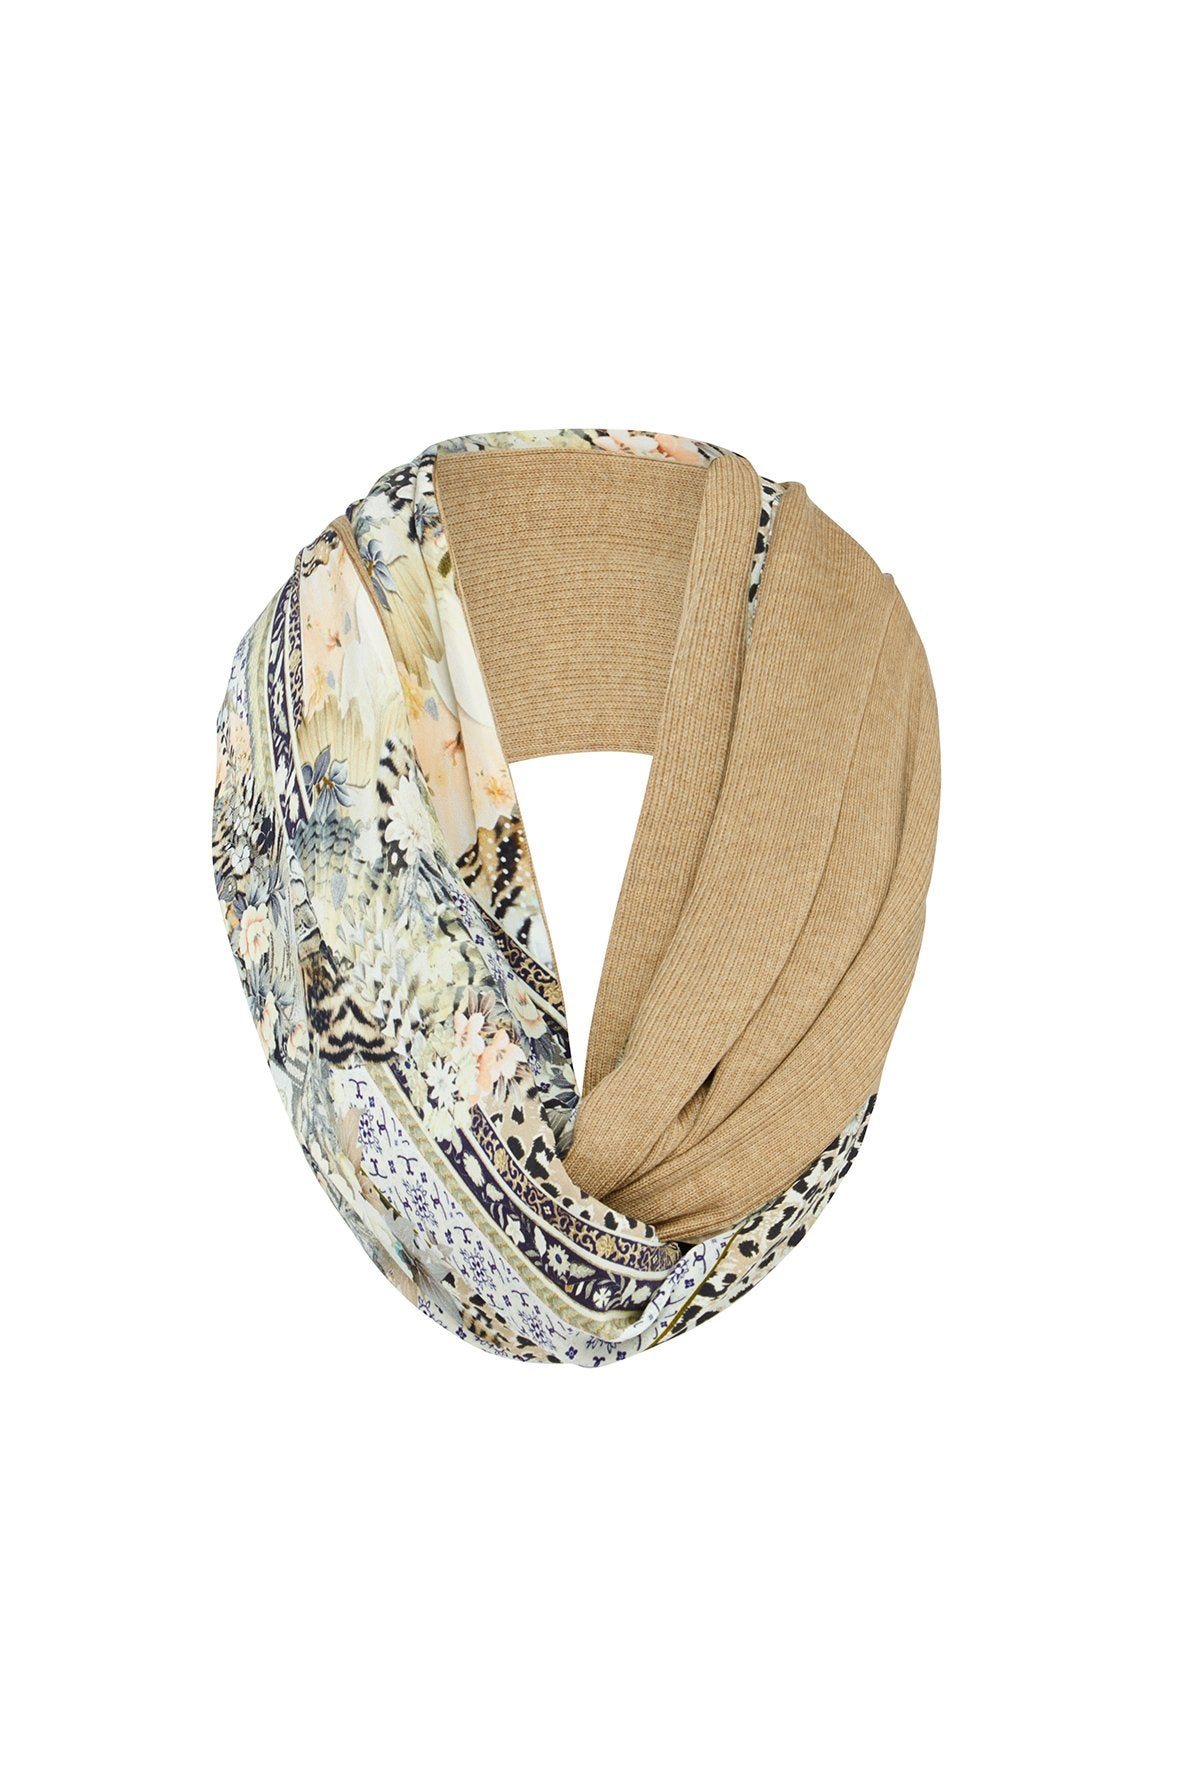 DOUBLE SIDED SCARF MOTO MAIKO